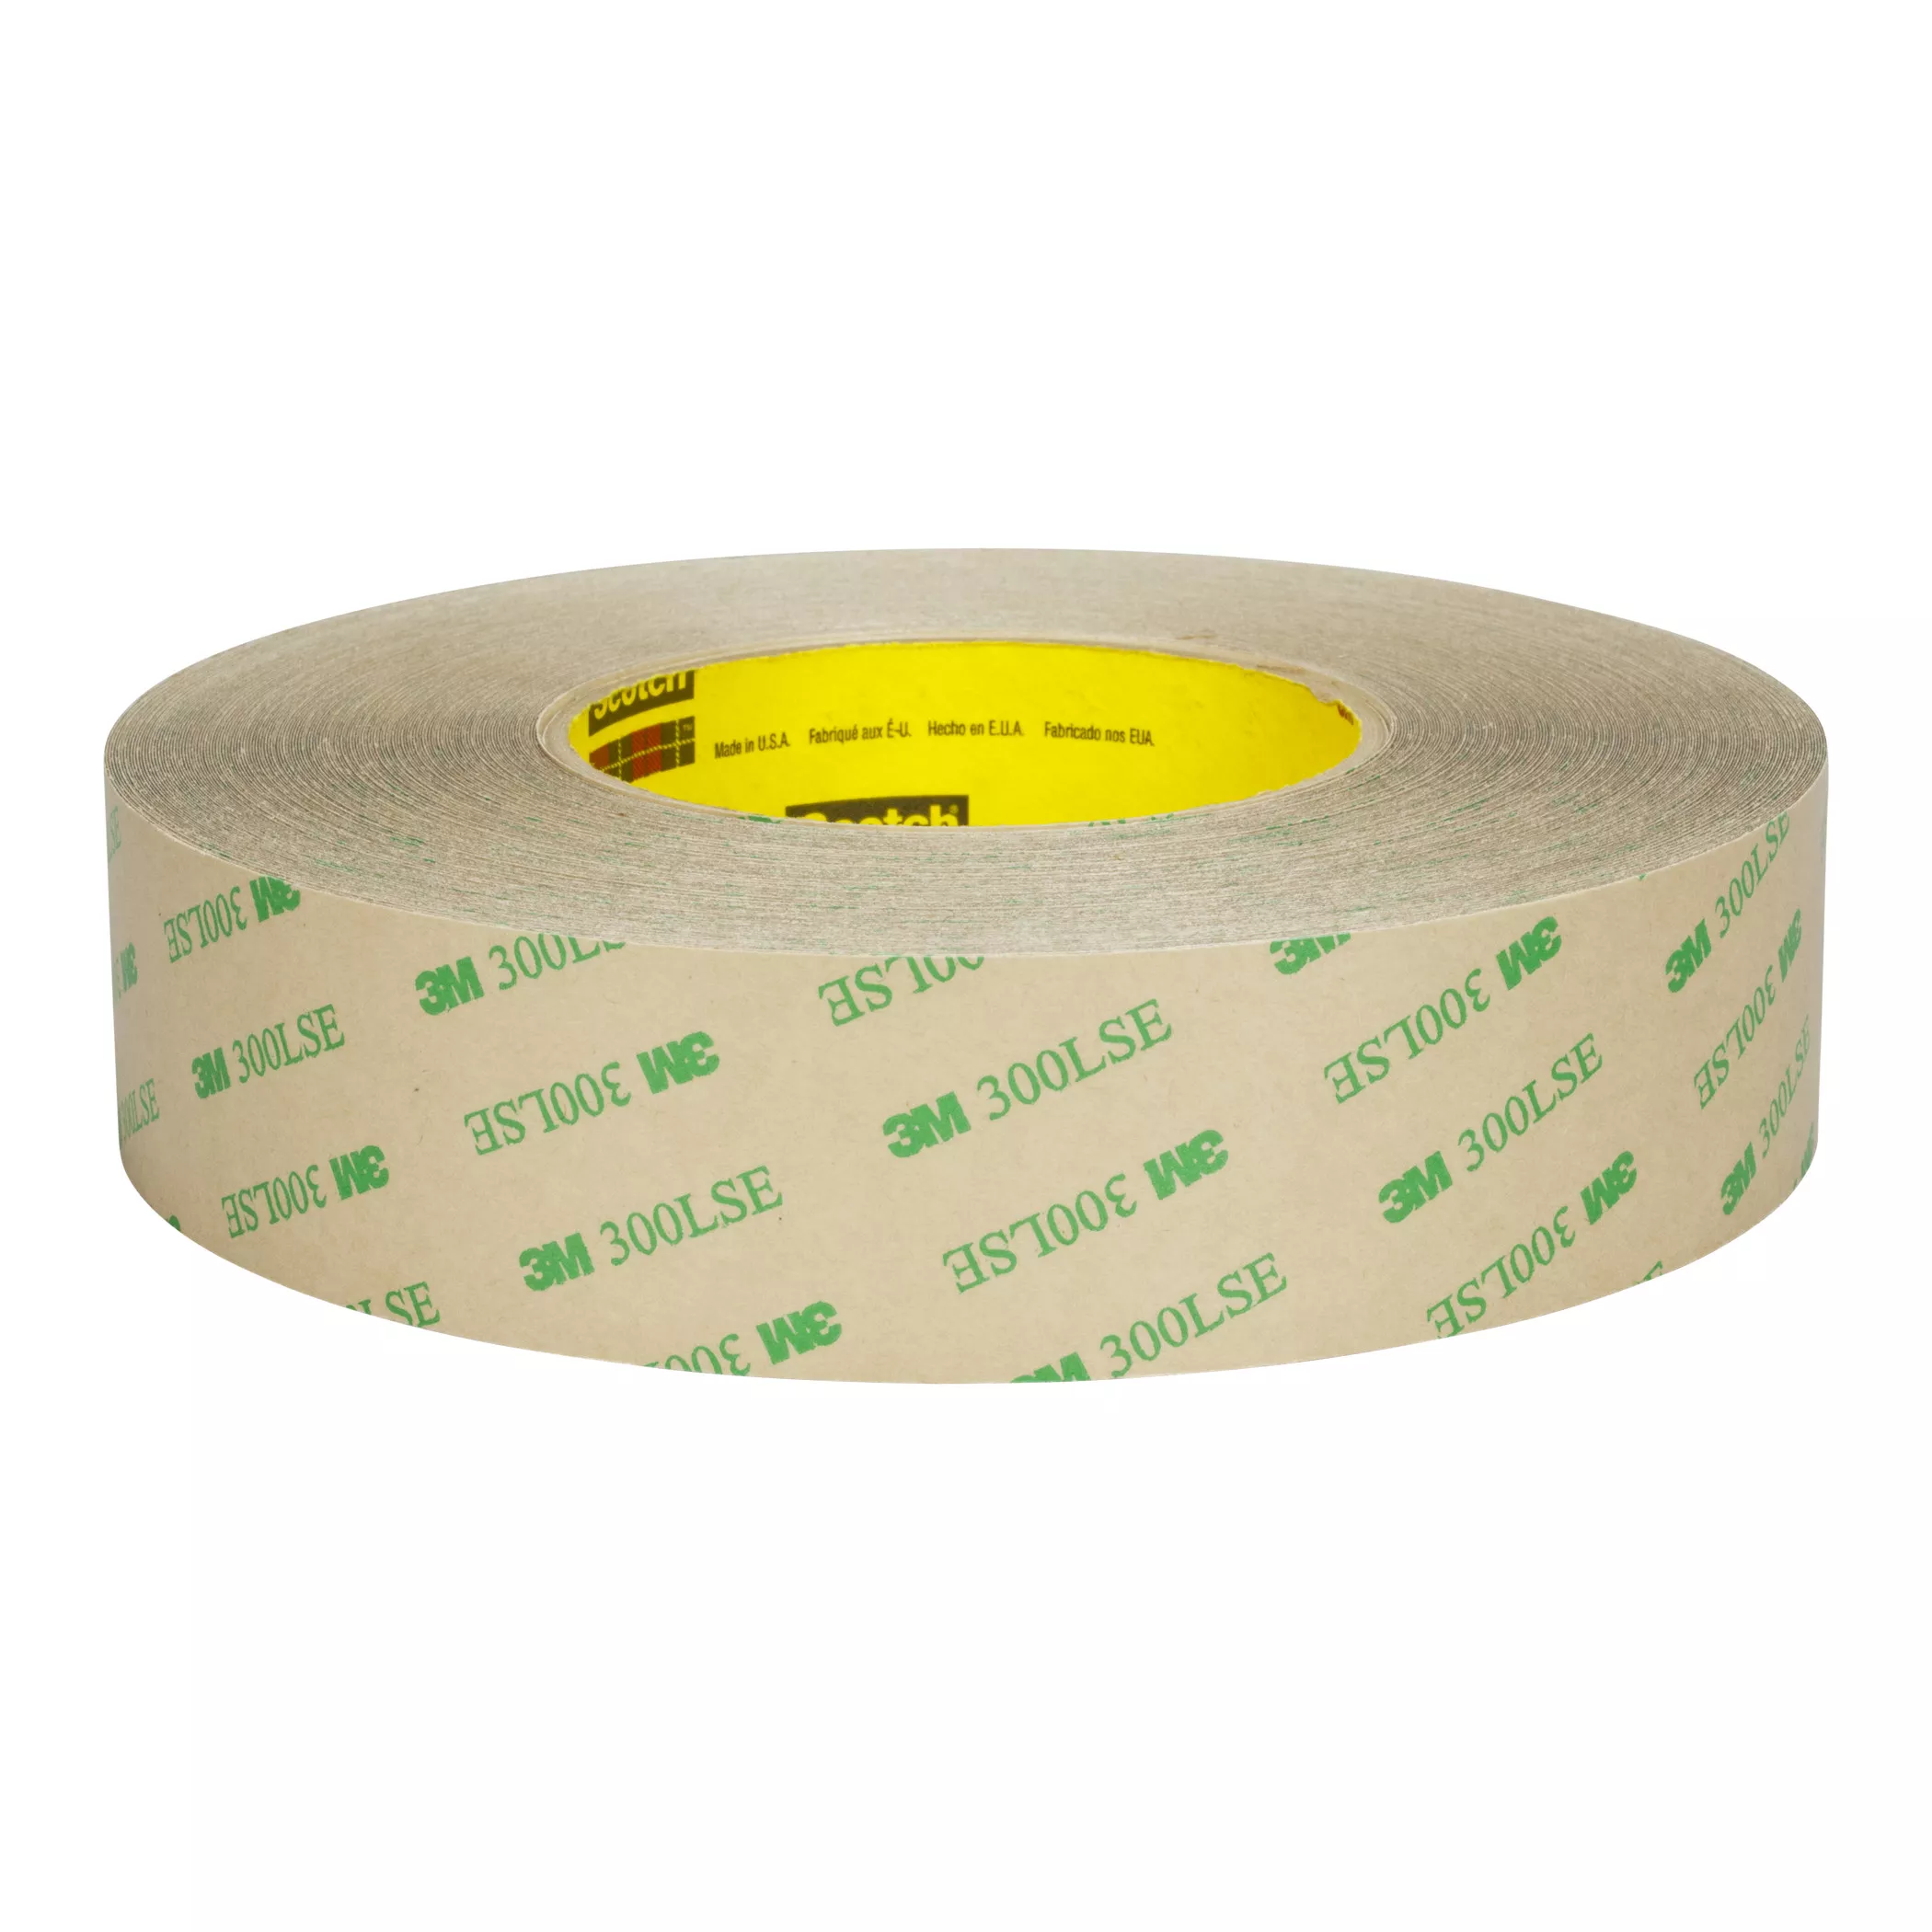 3M™ Adhesive Transfer Tape 9672LE, Clear, 27 in x 180 yd, 5 mil, 1
Roll/Case